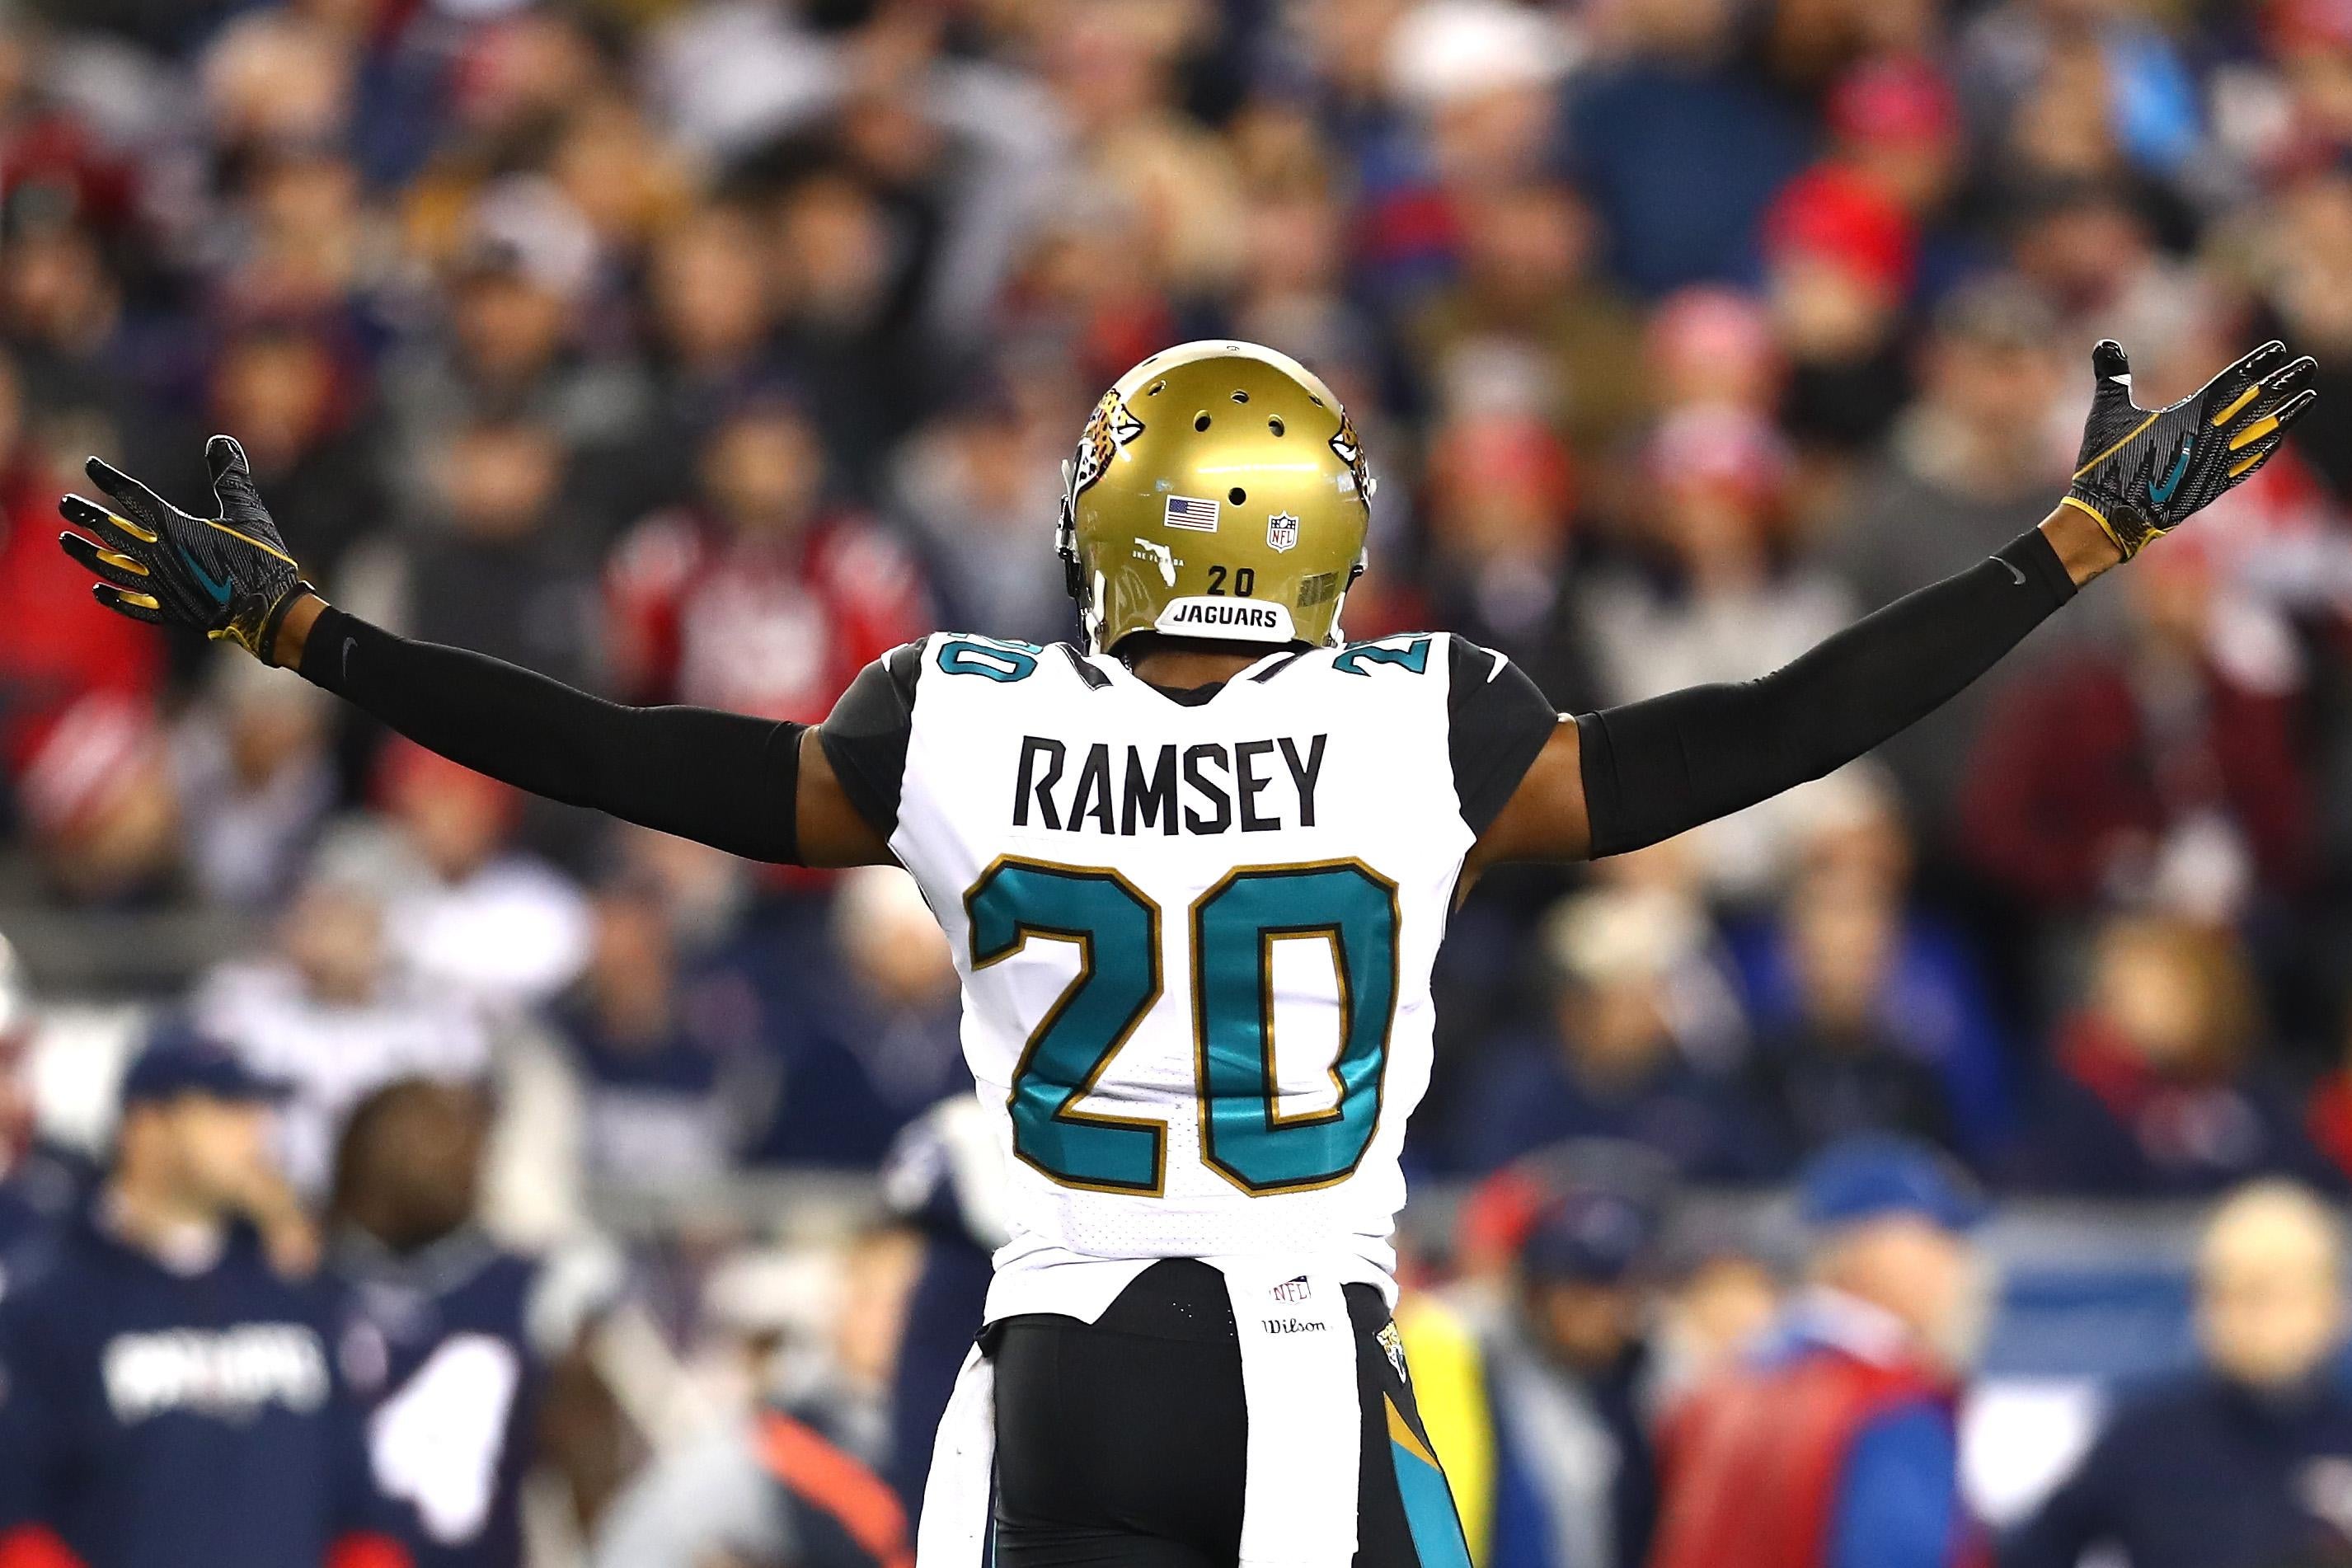 Jalen Ramsey of the Jacksonville Jaguars lifts his arms up, wide, during the AFC Championship Game against the New England Patriots on Jan. 21 in Foxborough, Massachusetts.